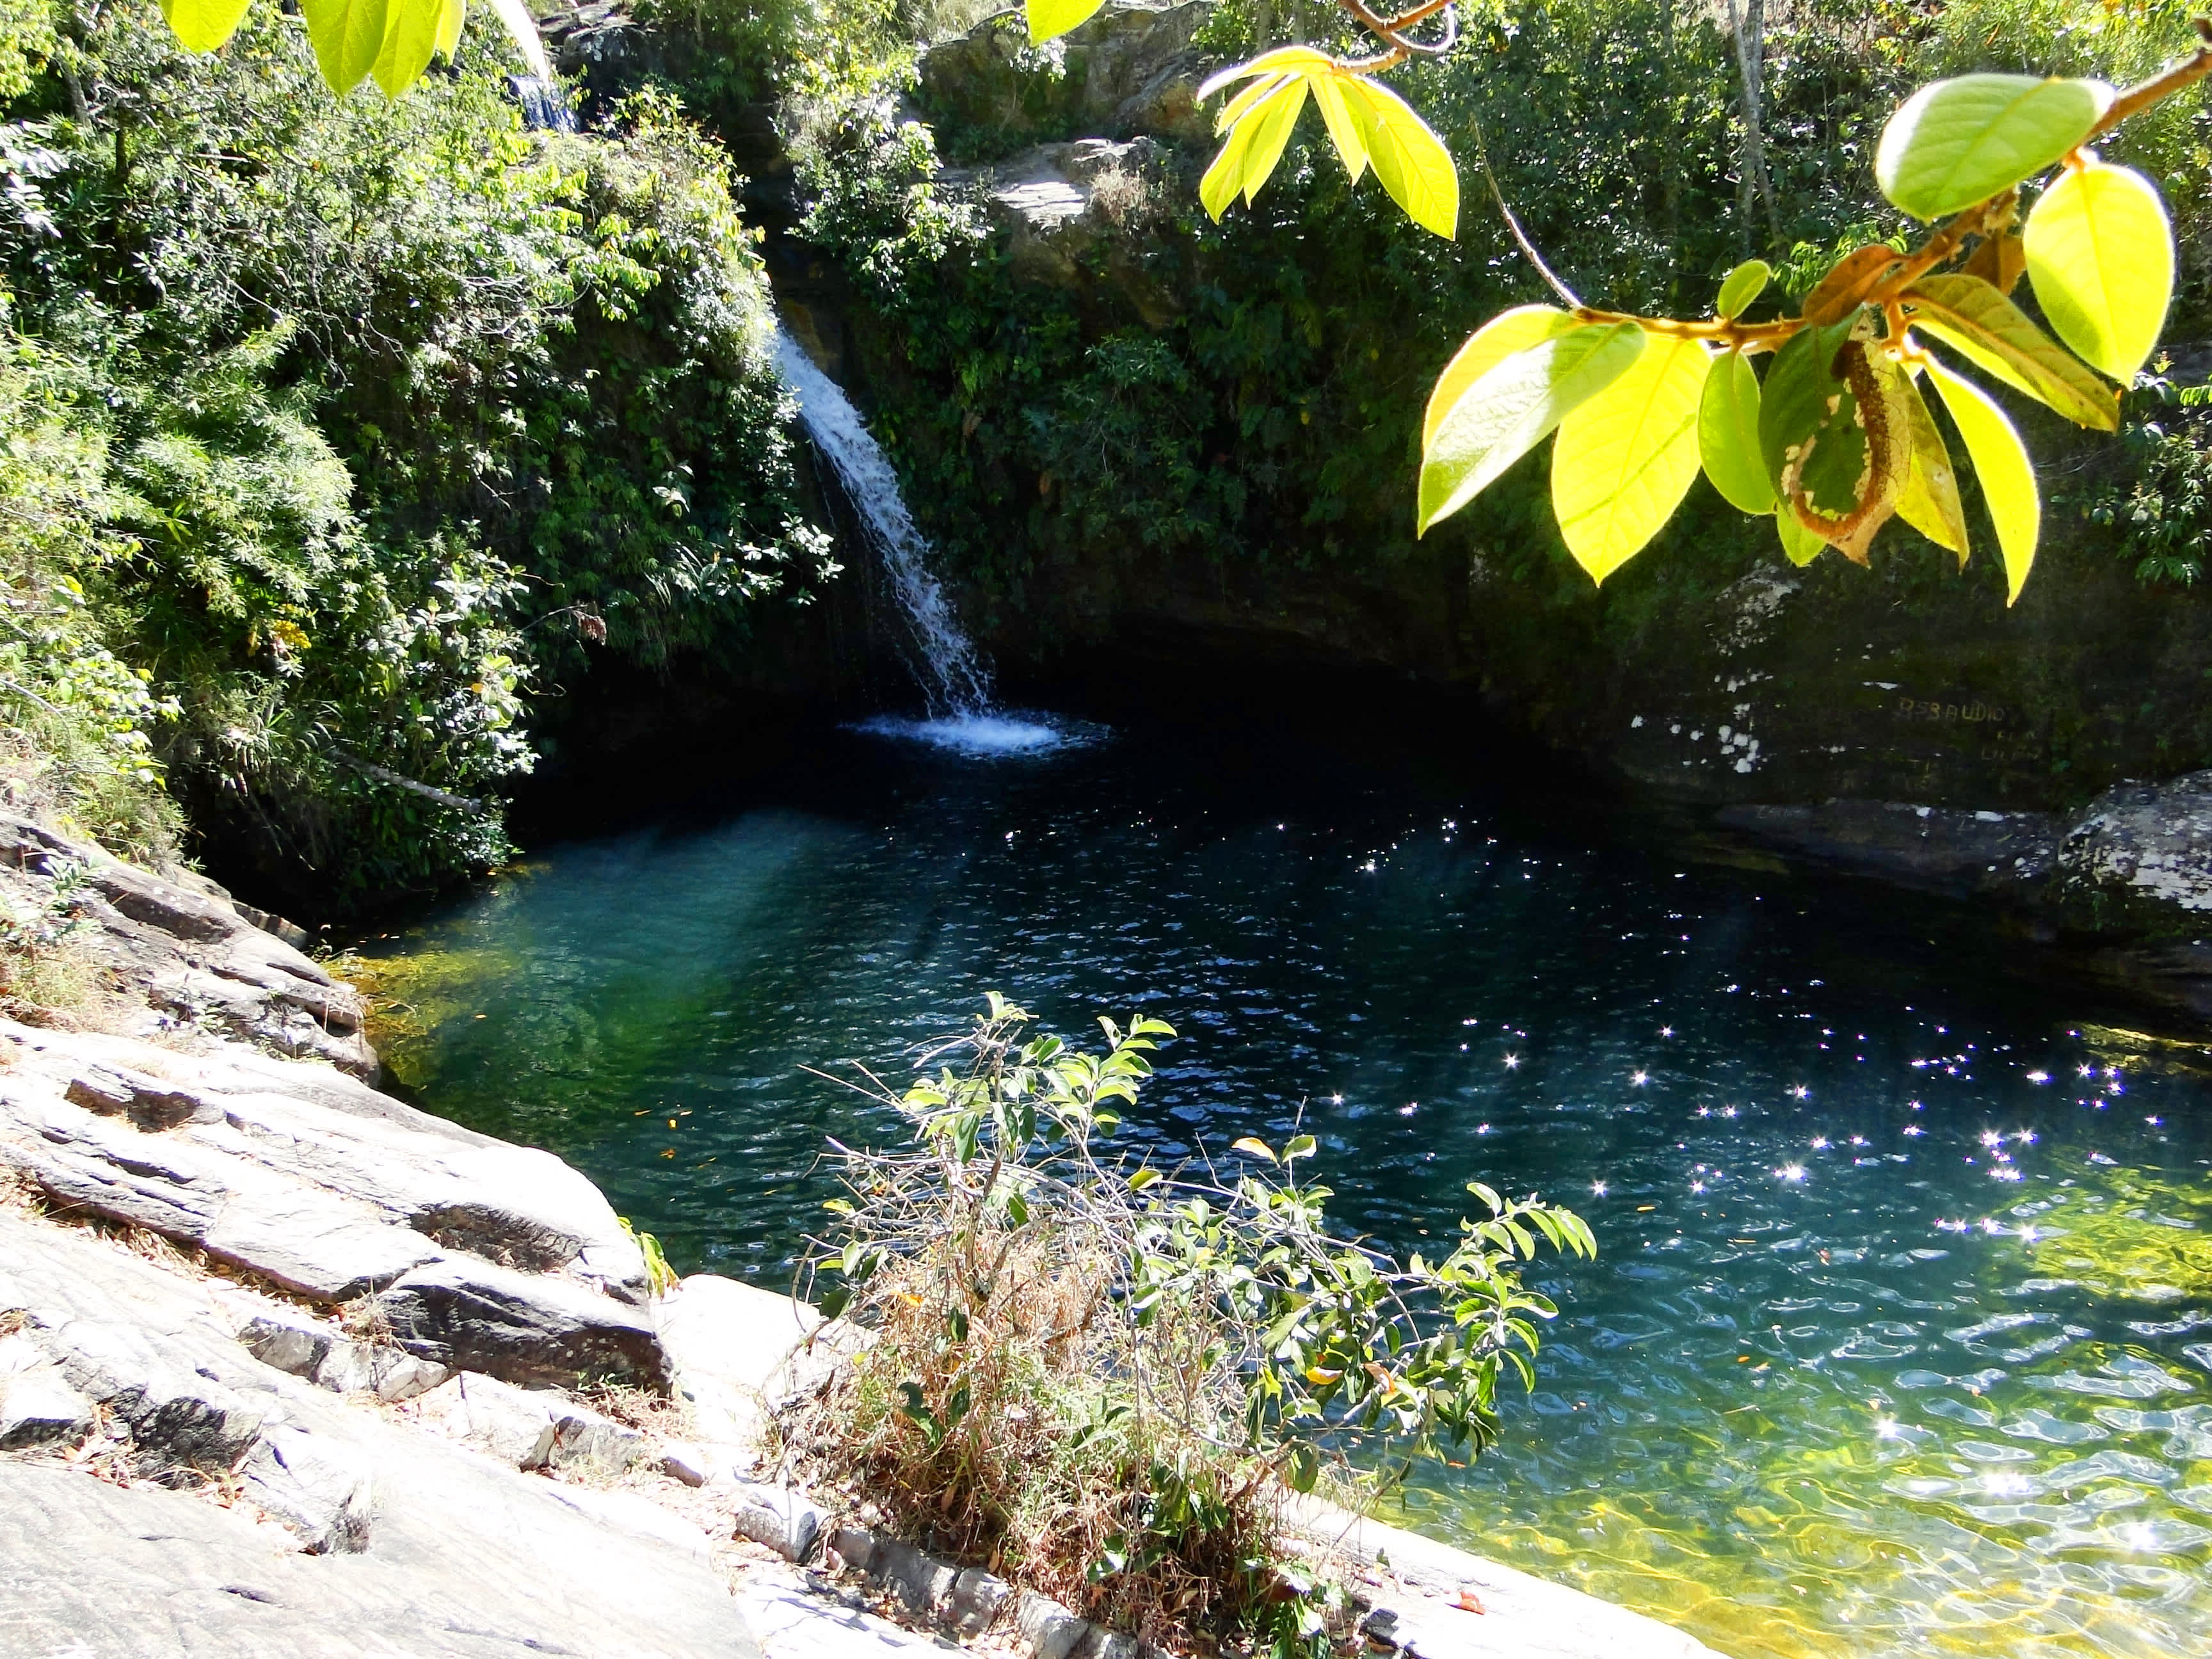 This picture shows a waterfall and lagoon to do canyoning activities